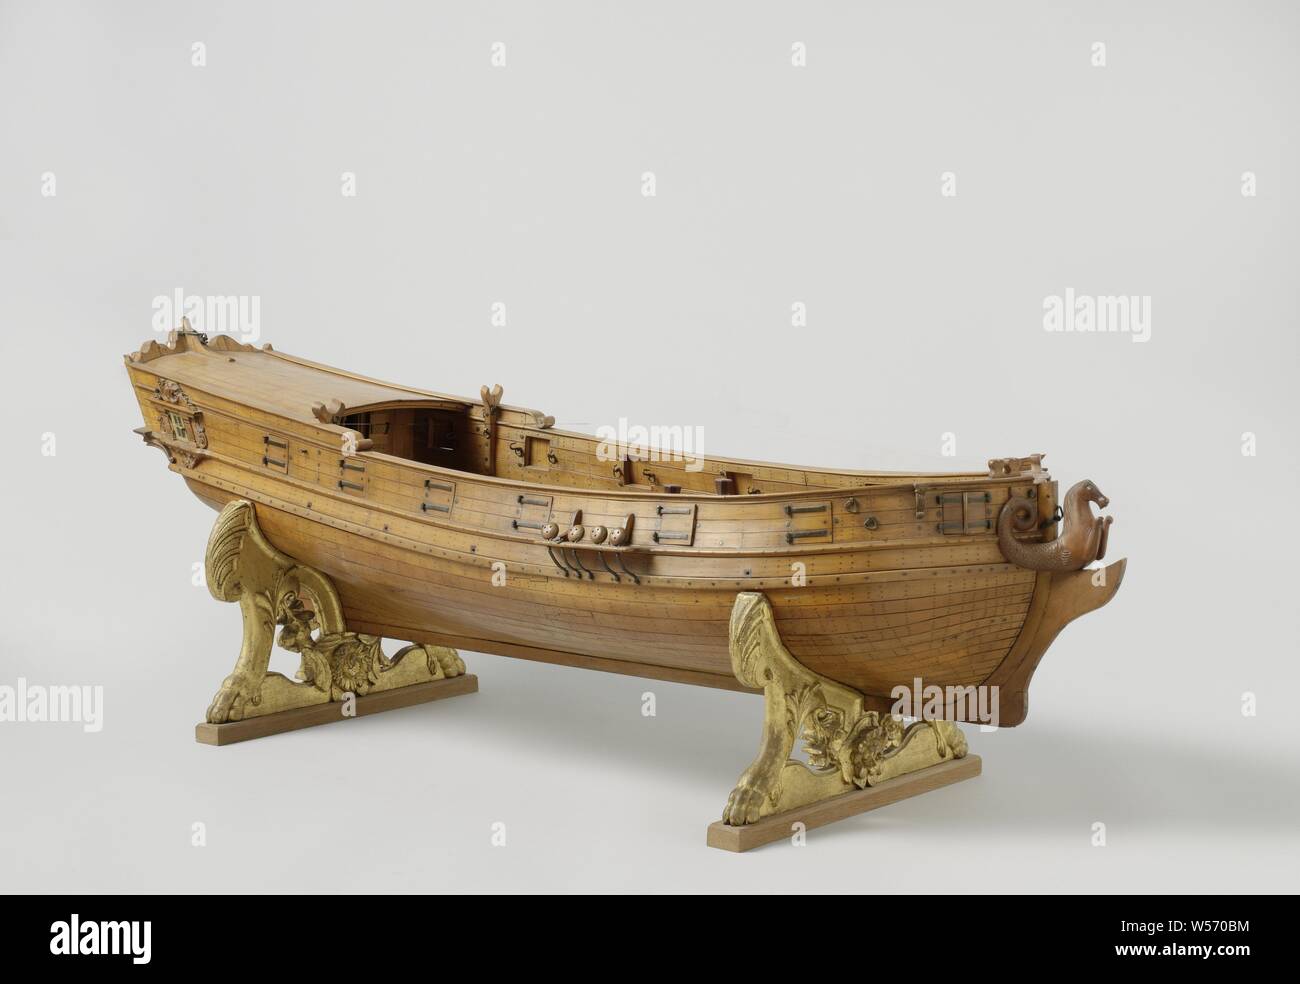 Model of a Yacht, Statenjacht, palm-wood model, equipped for carrying fourteen guns. Without rigging. A sea horse on the prow. The mirror decorated with carved war attributes. The model stands on two sculpted feet, ship model, anonymous, unknown, c. 1400 - c. 1950, wood (plant material), boxwood, h 126 cm × w 38 cm × d 37 cm h 48.5 cm × w 128.5 cm × d 45.5 cm Stock Photo